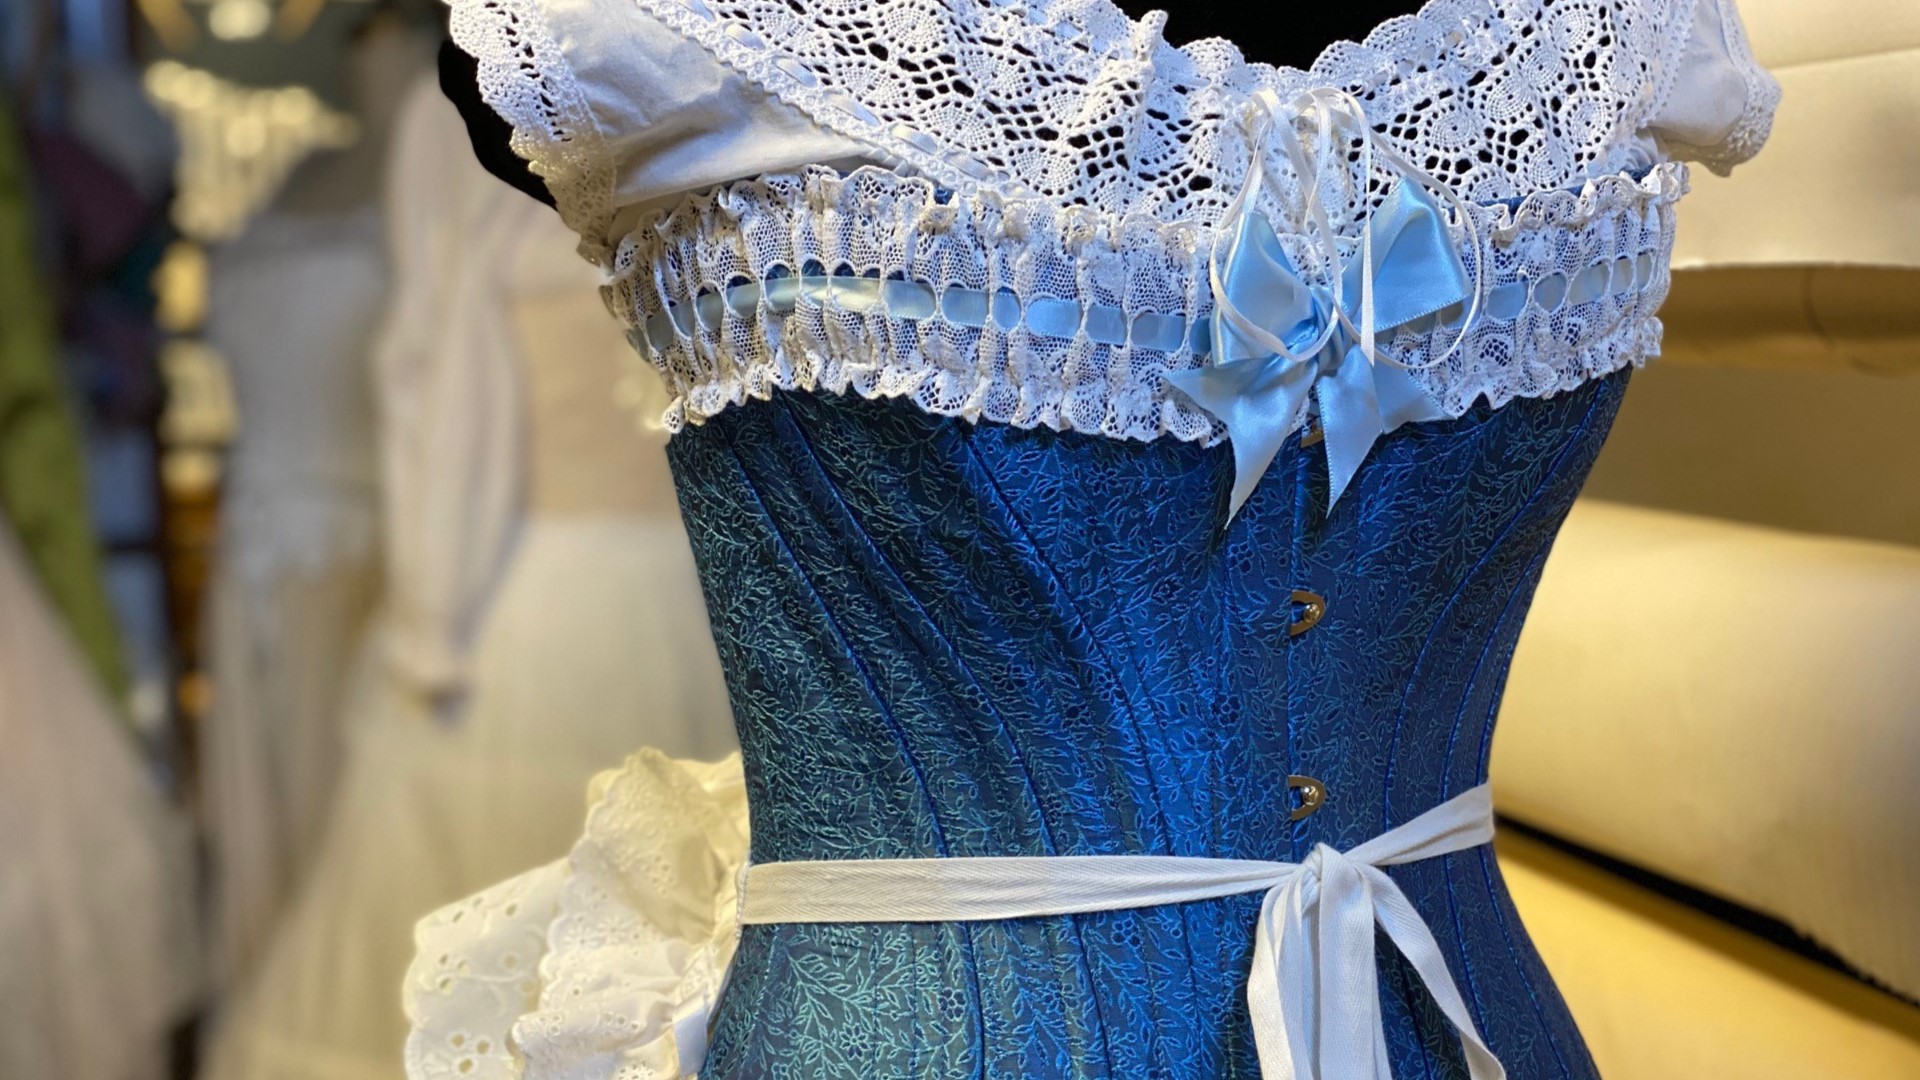 Period Corsets keeps period dramas like "1883" and "Dickinson" in great shape. #k5evening